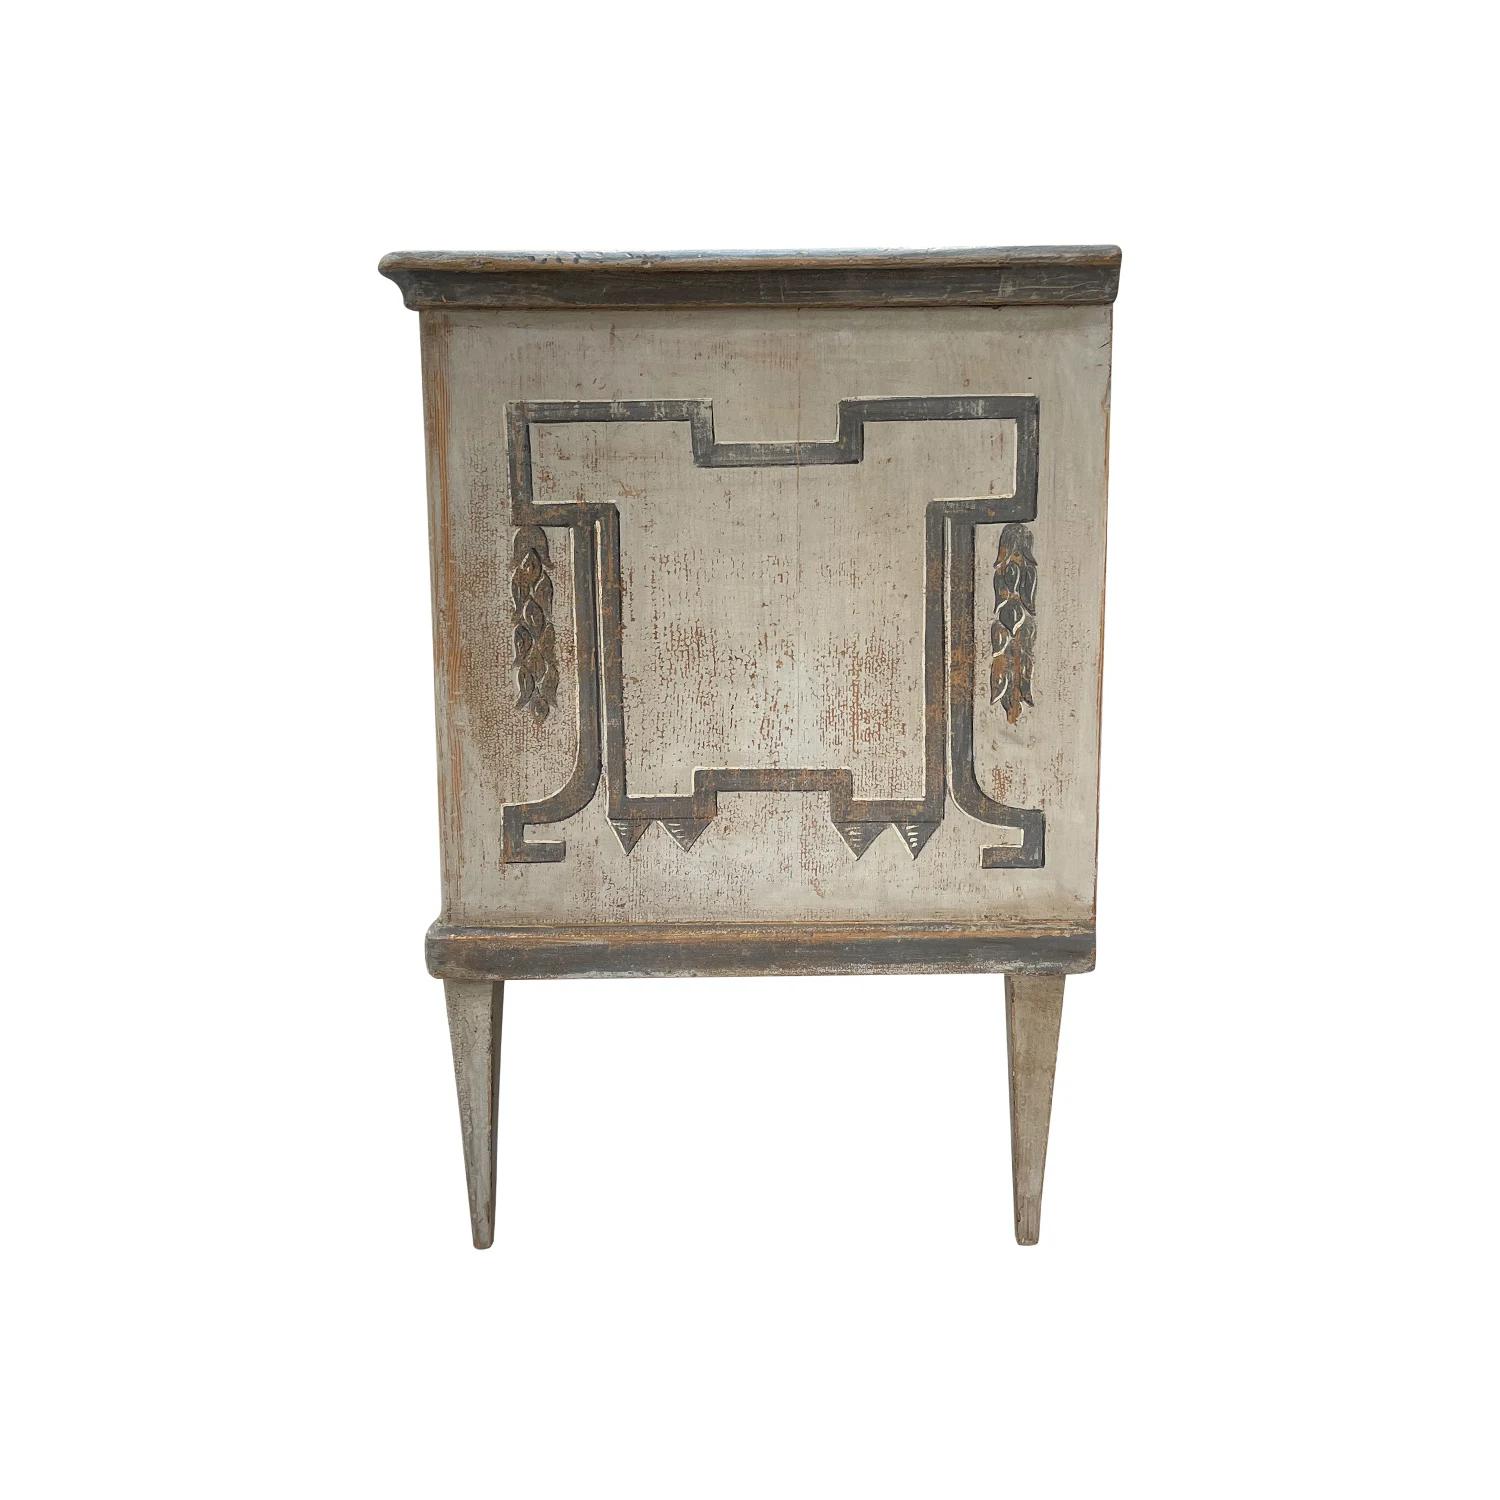 19th Century Grey German Single Biedermeier Pinewood Chest, Antique Commode In Good Condition For Sale In West Palm Beach, FL